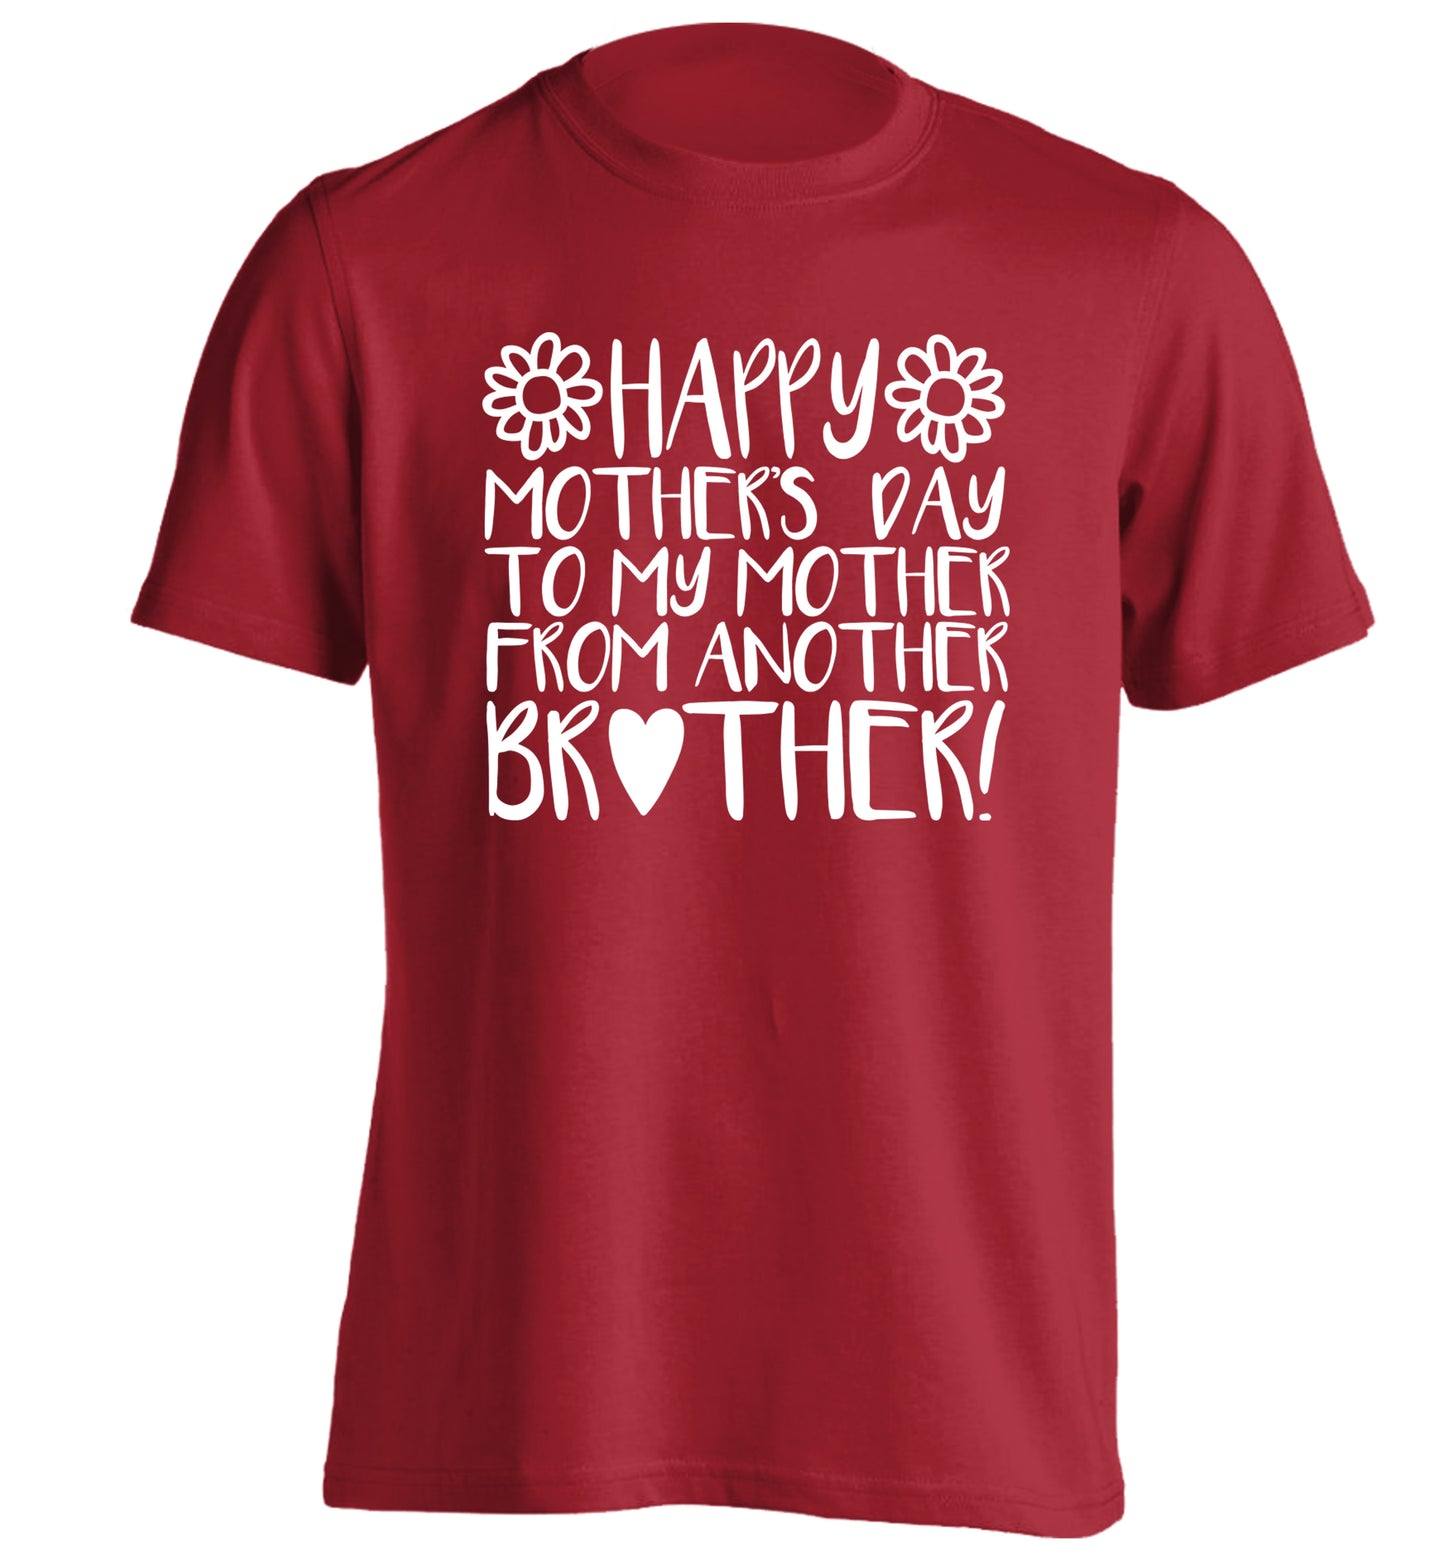 Happy mother's day to my mother from another brother adults unisex red Tshirt 2XL